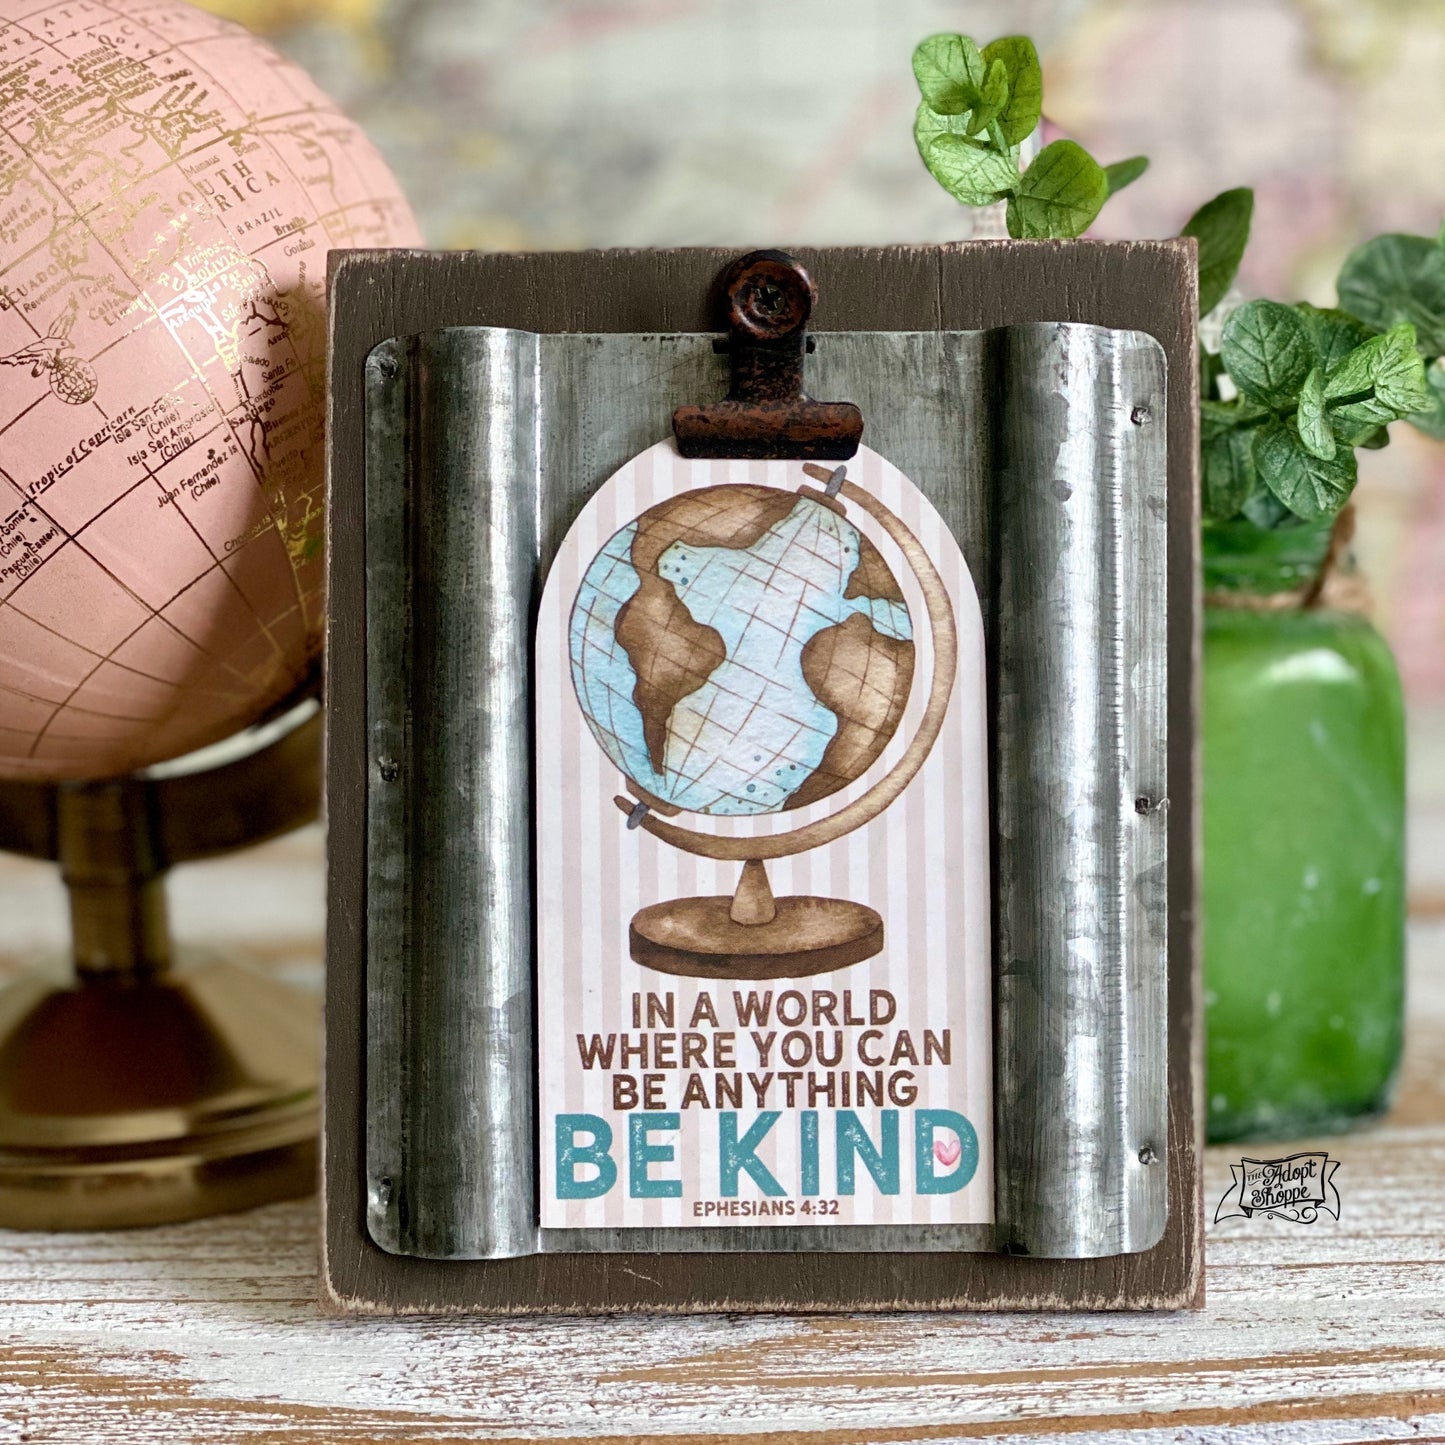 in a world where you can be anything BE KIND (Ephesians 4:32) #TheAdoptShoppecard